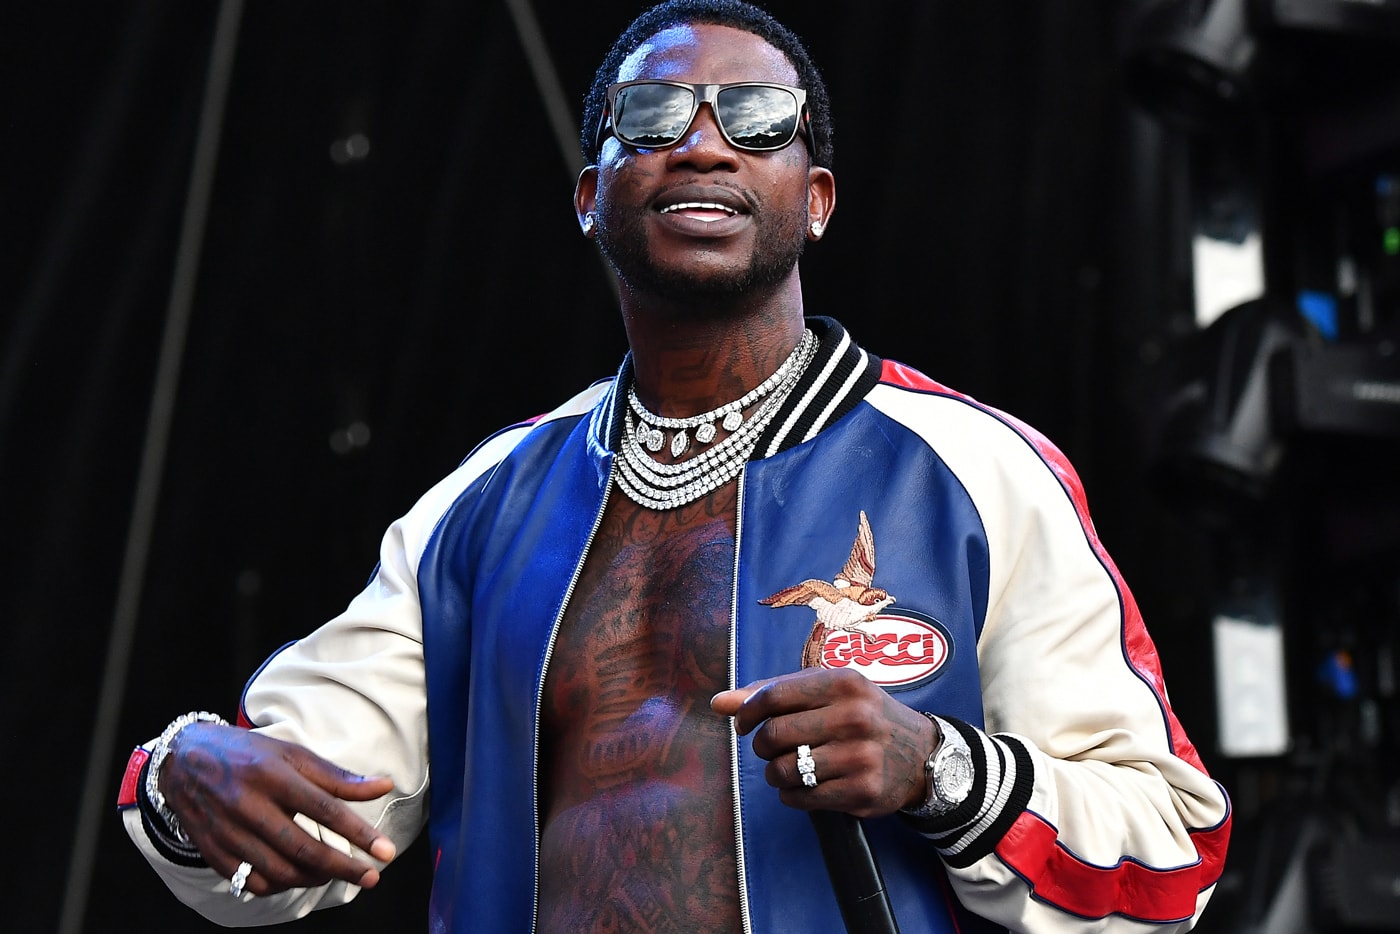 gucci-mane-releases-personal-video-thanking-fans